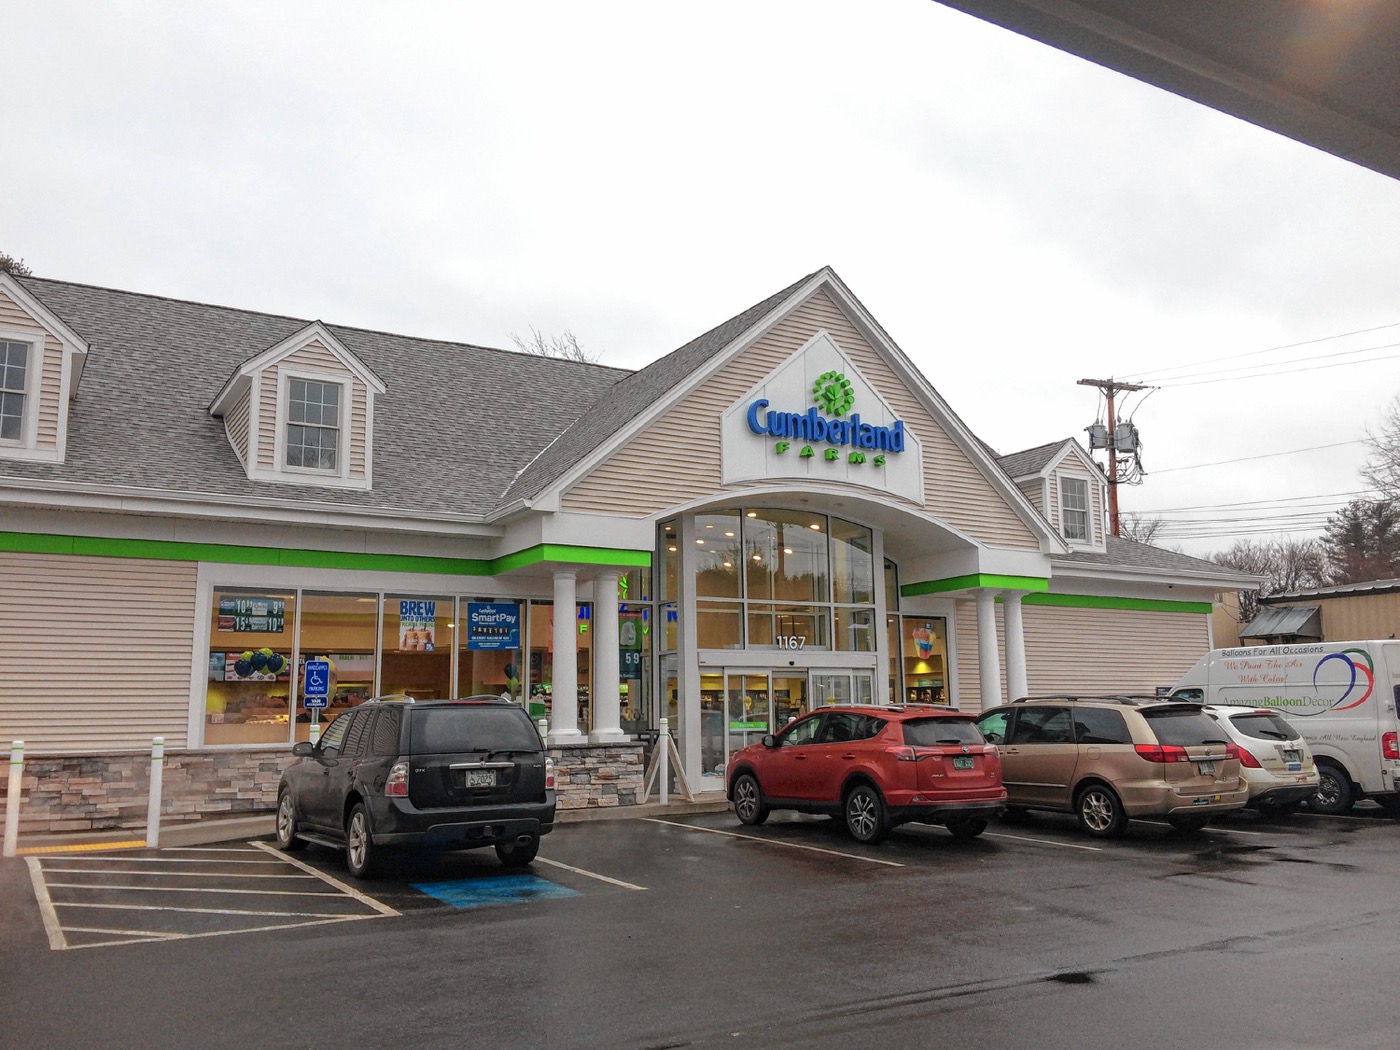 Cumberland Farms’ remodeled convenience store at 1167 Hartford Ave. in White River Junction opened earlier this month. The 4,786-square-foot store features a modernized layout, an interior high-top bar counter and outdoor patio seating and now will offer hot food items, the Westborough, Mass.-based company said in a news release. The company's remodeling initiative began in 2009, and more than 300 new and remodeled locations have been completed. (Courtesy photograph)